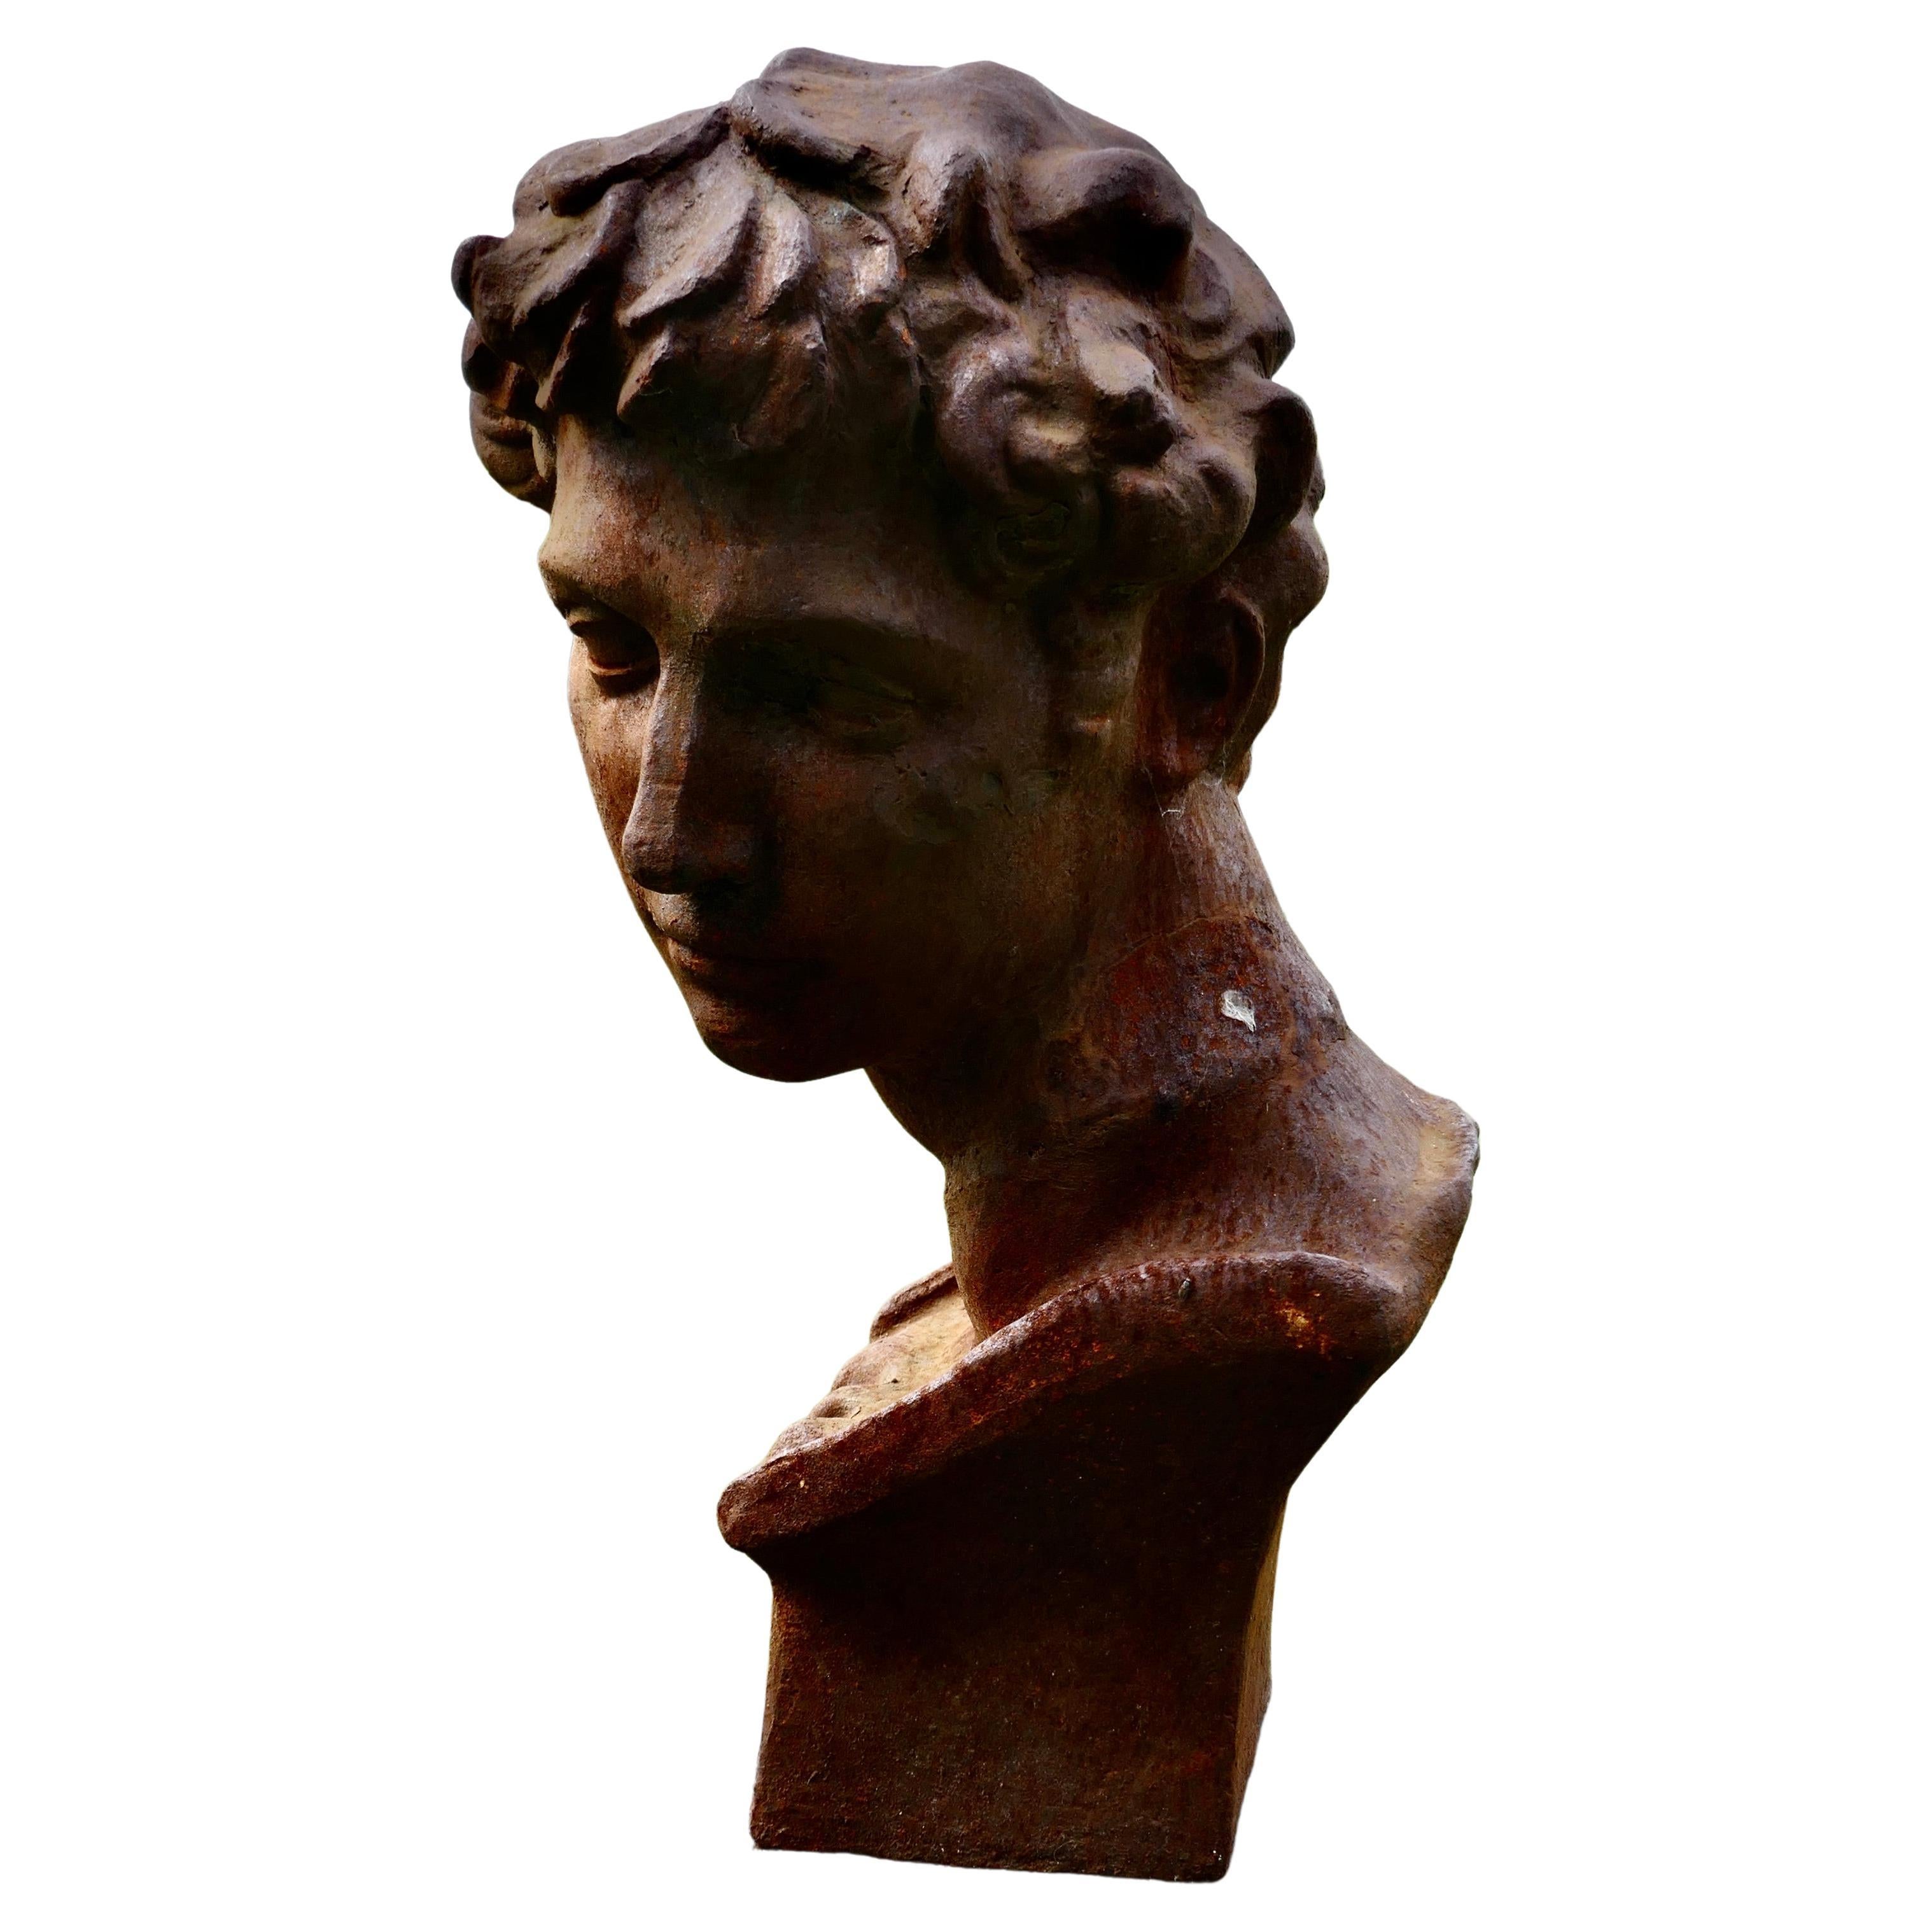  Weathered Cast Iron Statue of Michelangelo's David      For Sale